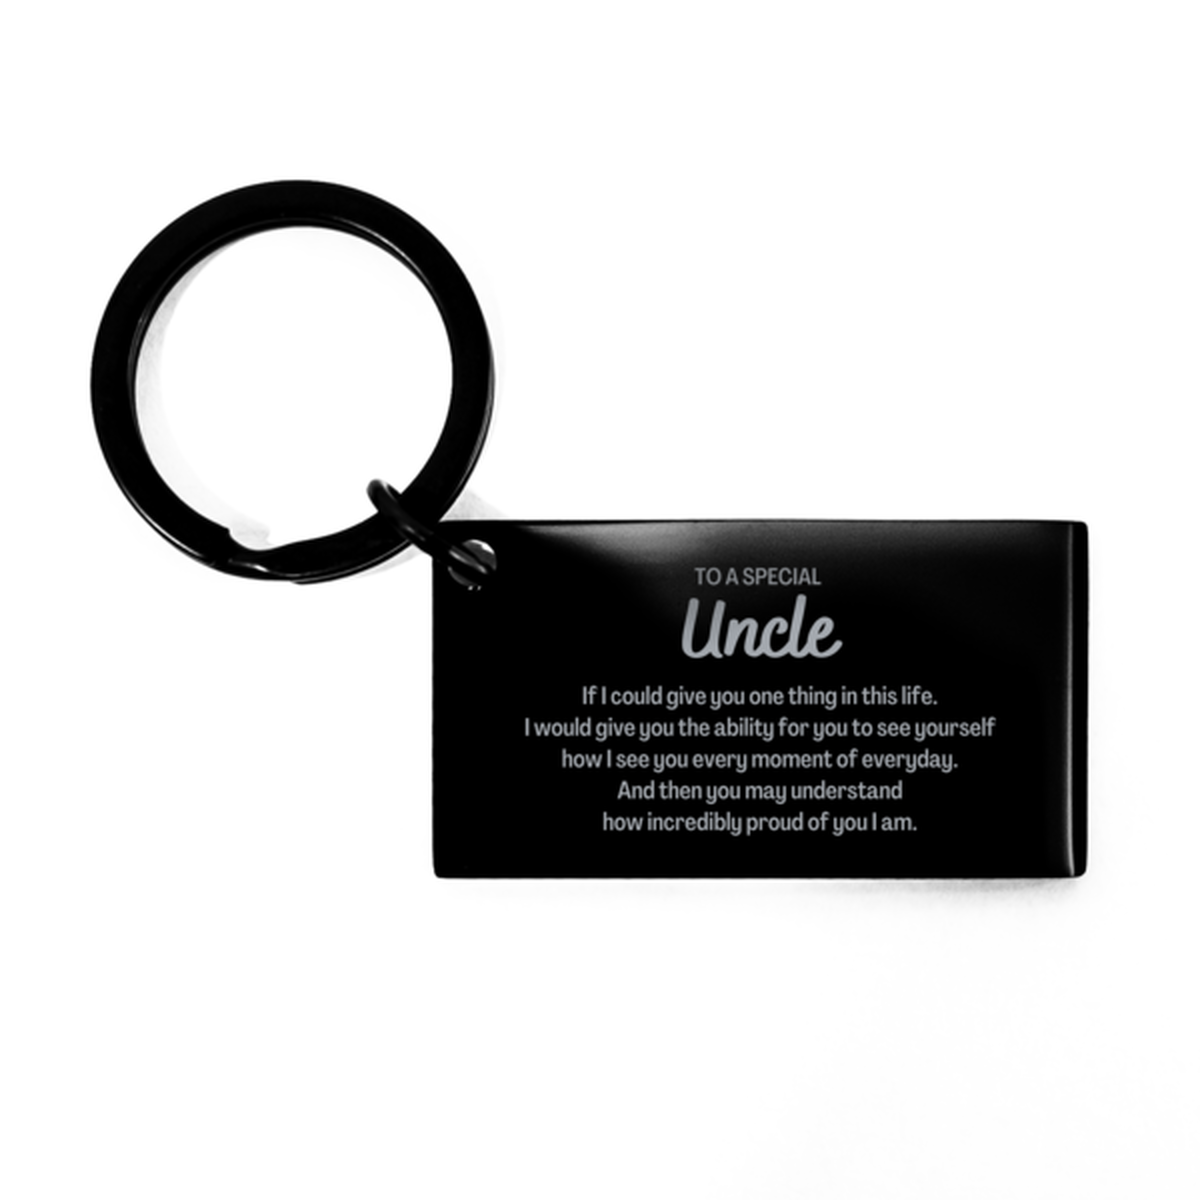 To My Uncle Keychain, Gifts For Uncle Engraved, Inspirational Gifts for Christmas Birthday, Epic Gifts for Uncle To A Special Uncle how incredibly proud of you I am